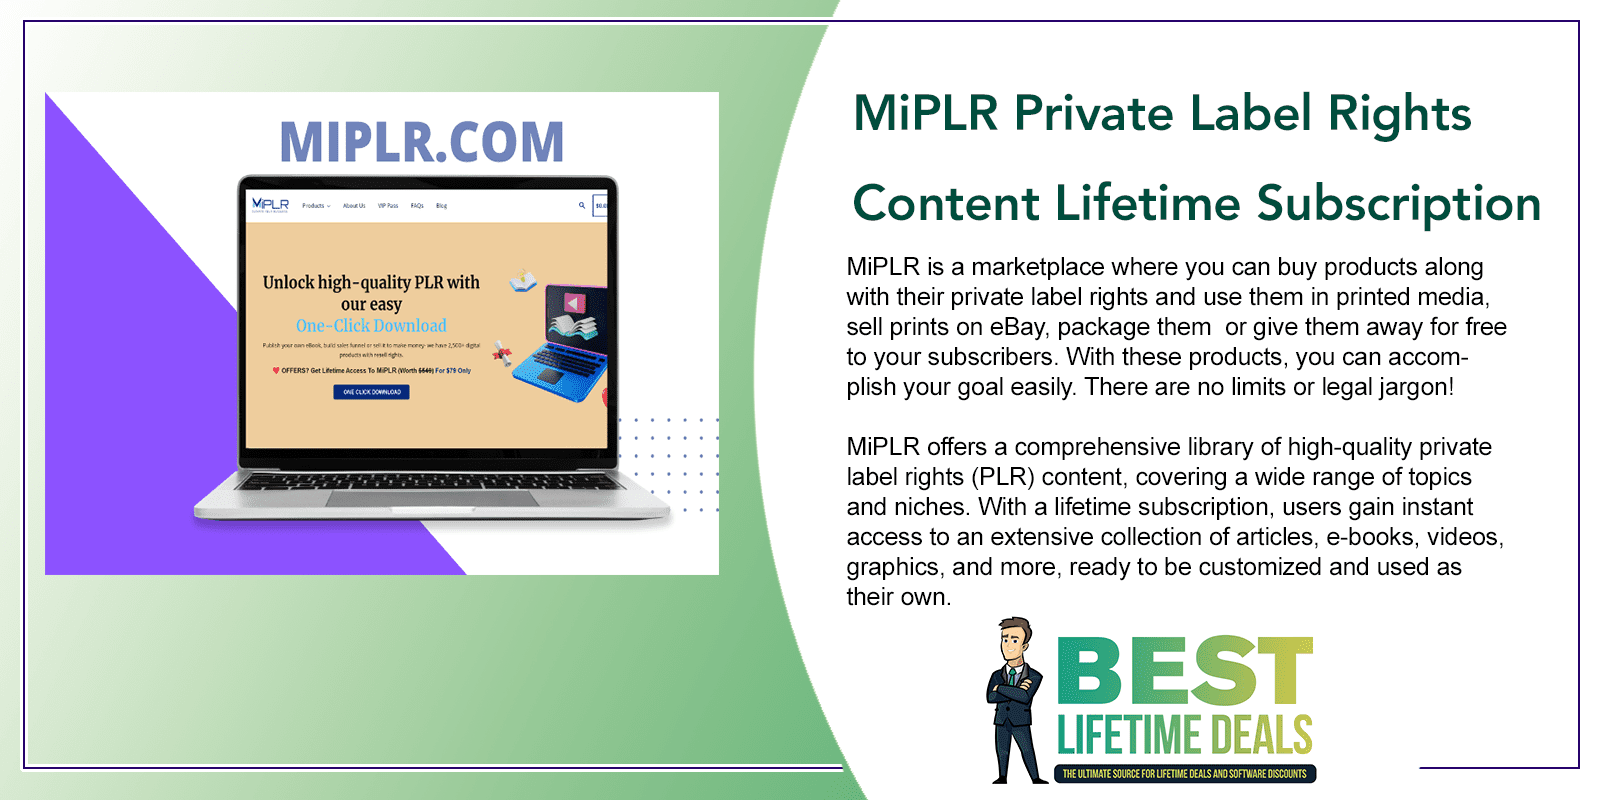 MiPLR Private Label Rights Content Lifetime Subscription Featured Image